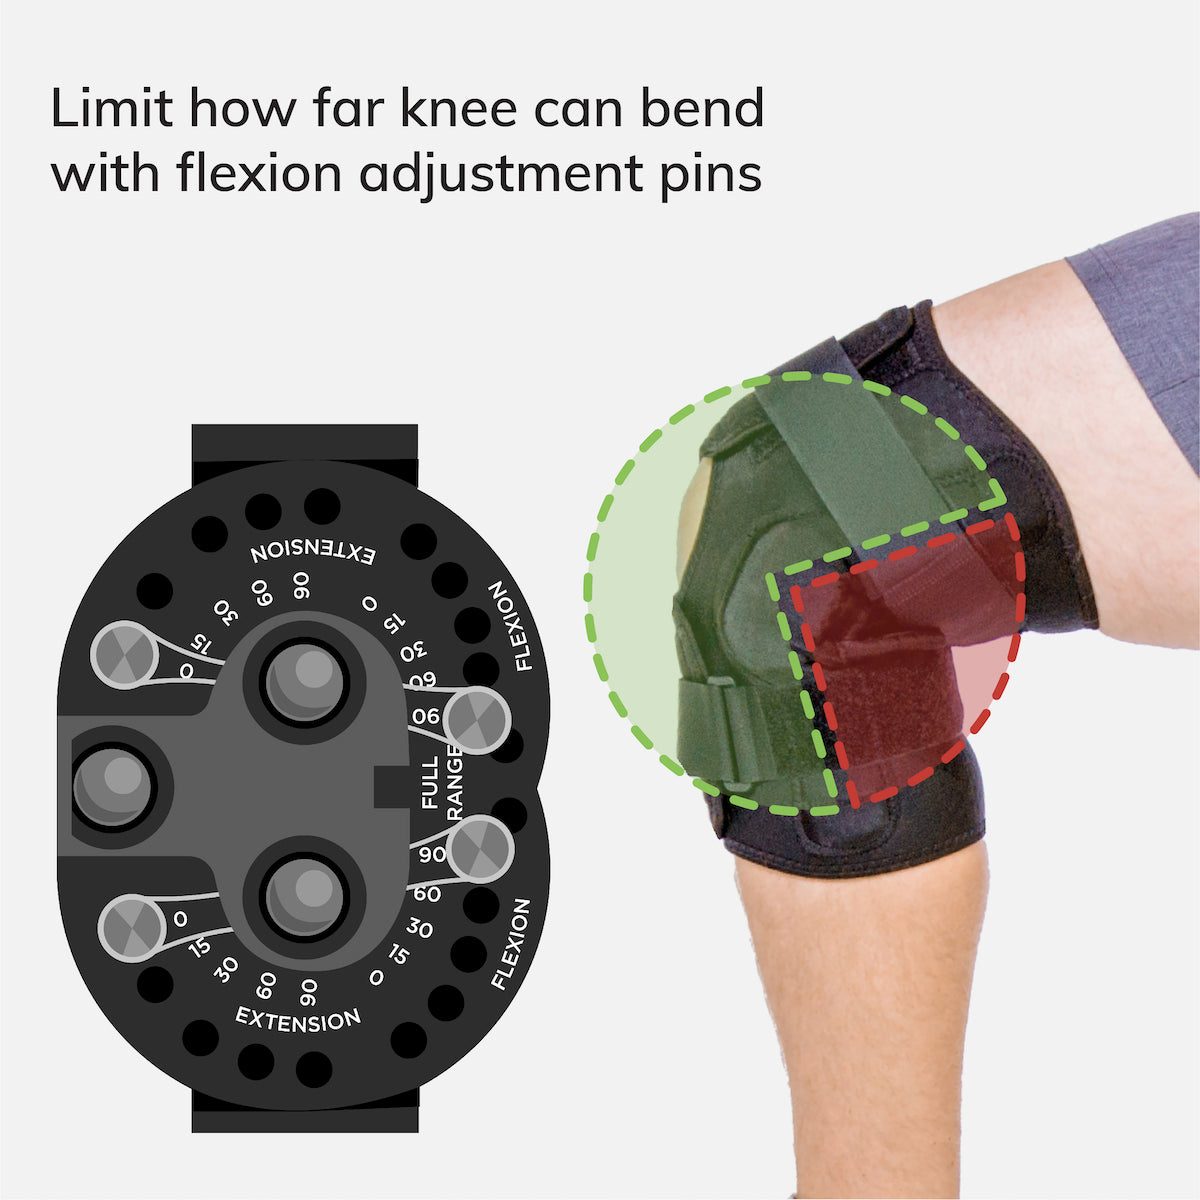 Adjusting flexion limits bend of knee. Adjusting extension limits how far you can straighten your knee.